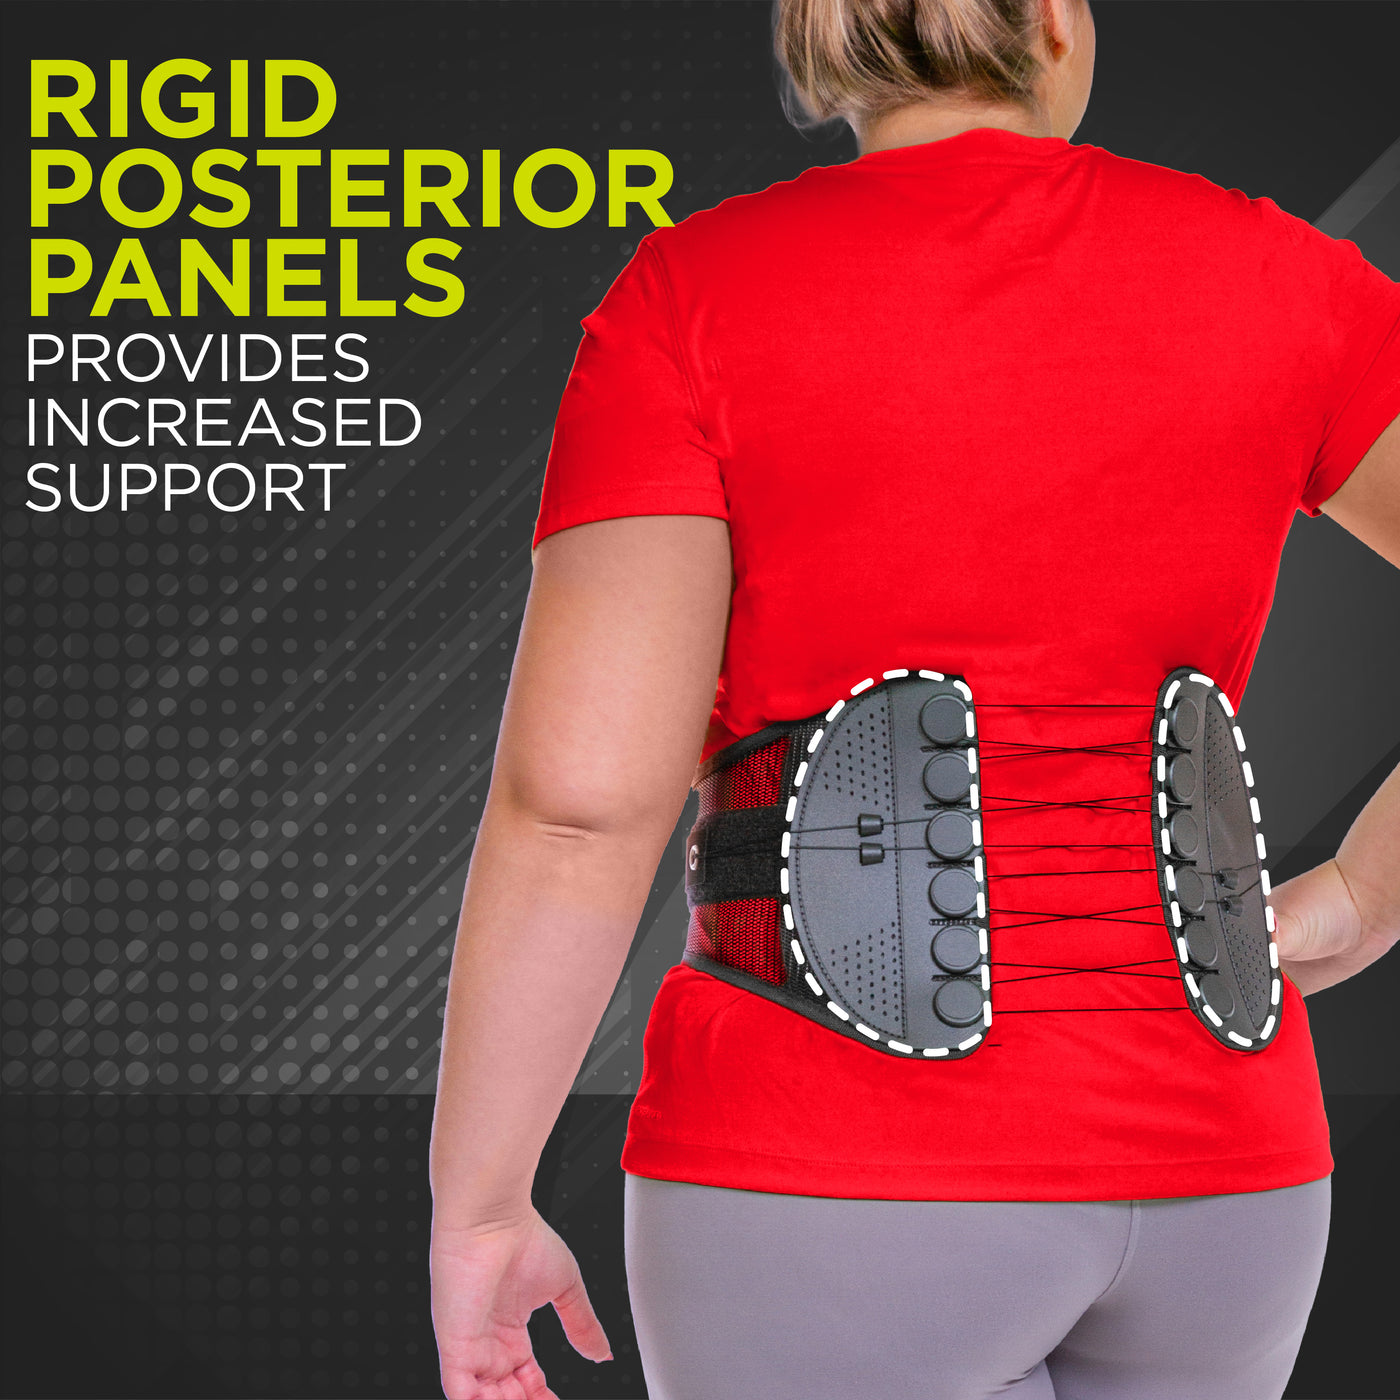 Low-profile posterior panel conforms to your body permitting a greater range of motion